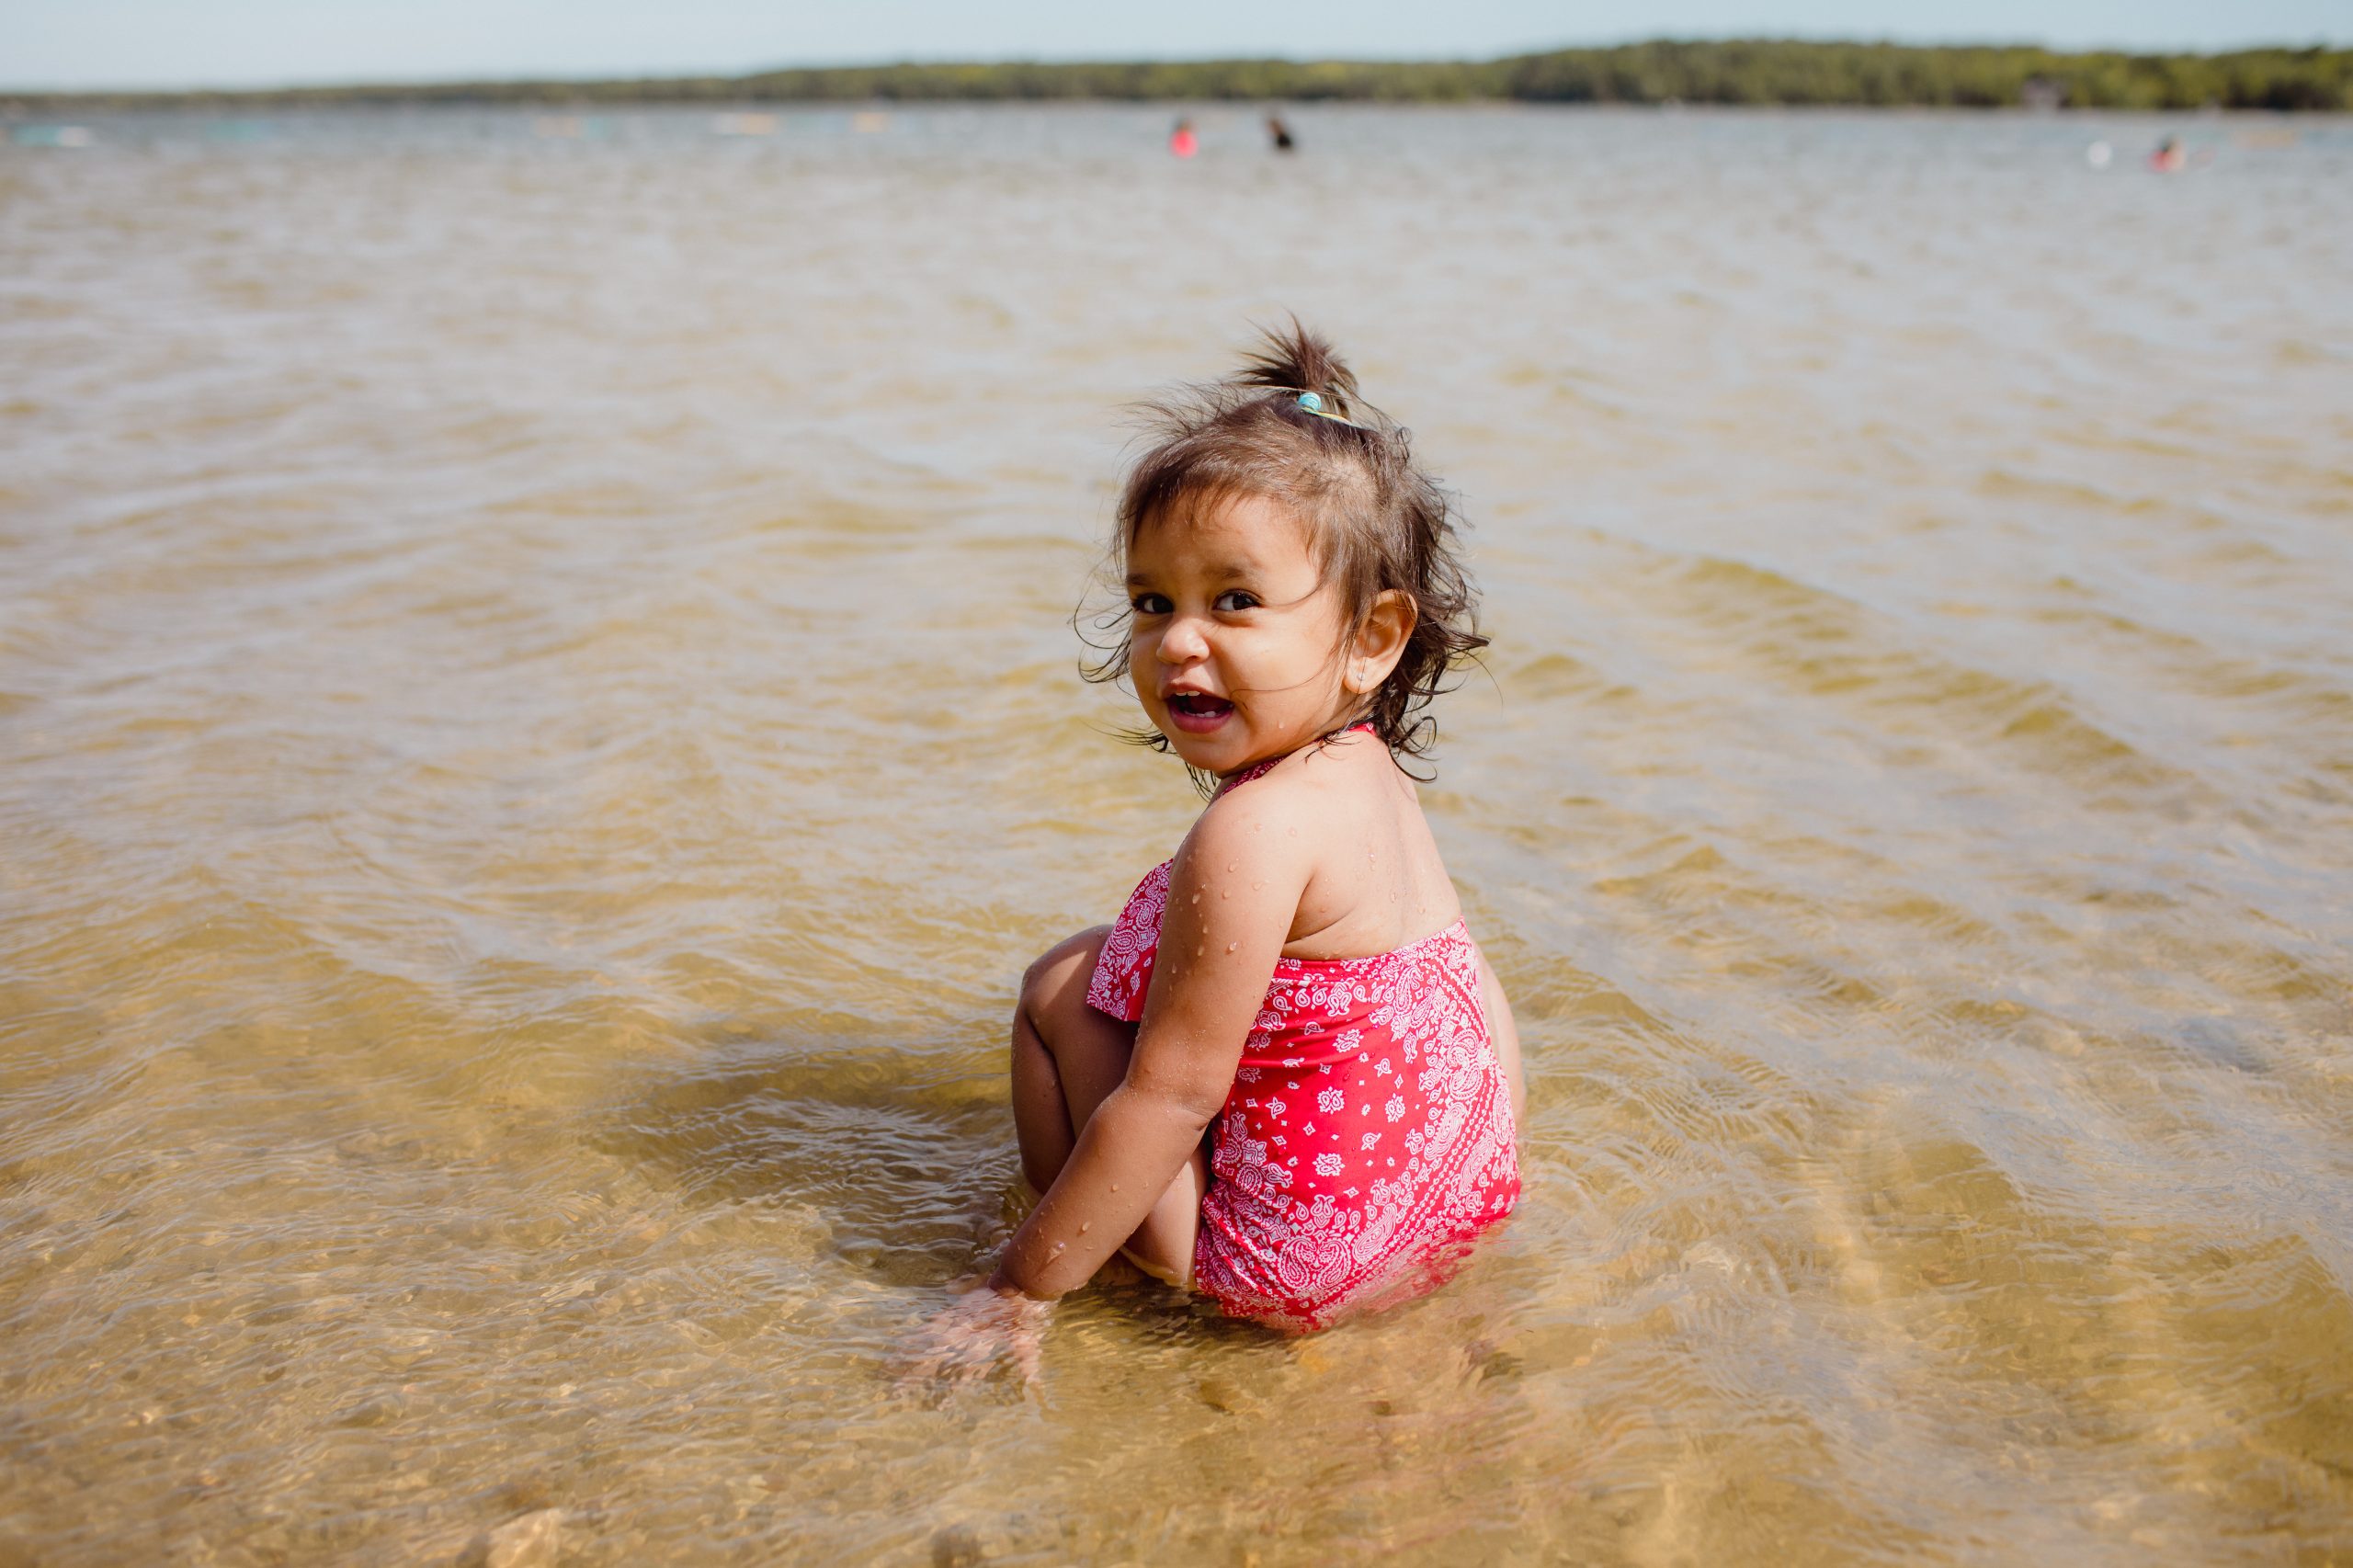 Child on beach in Bruce County